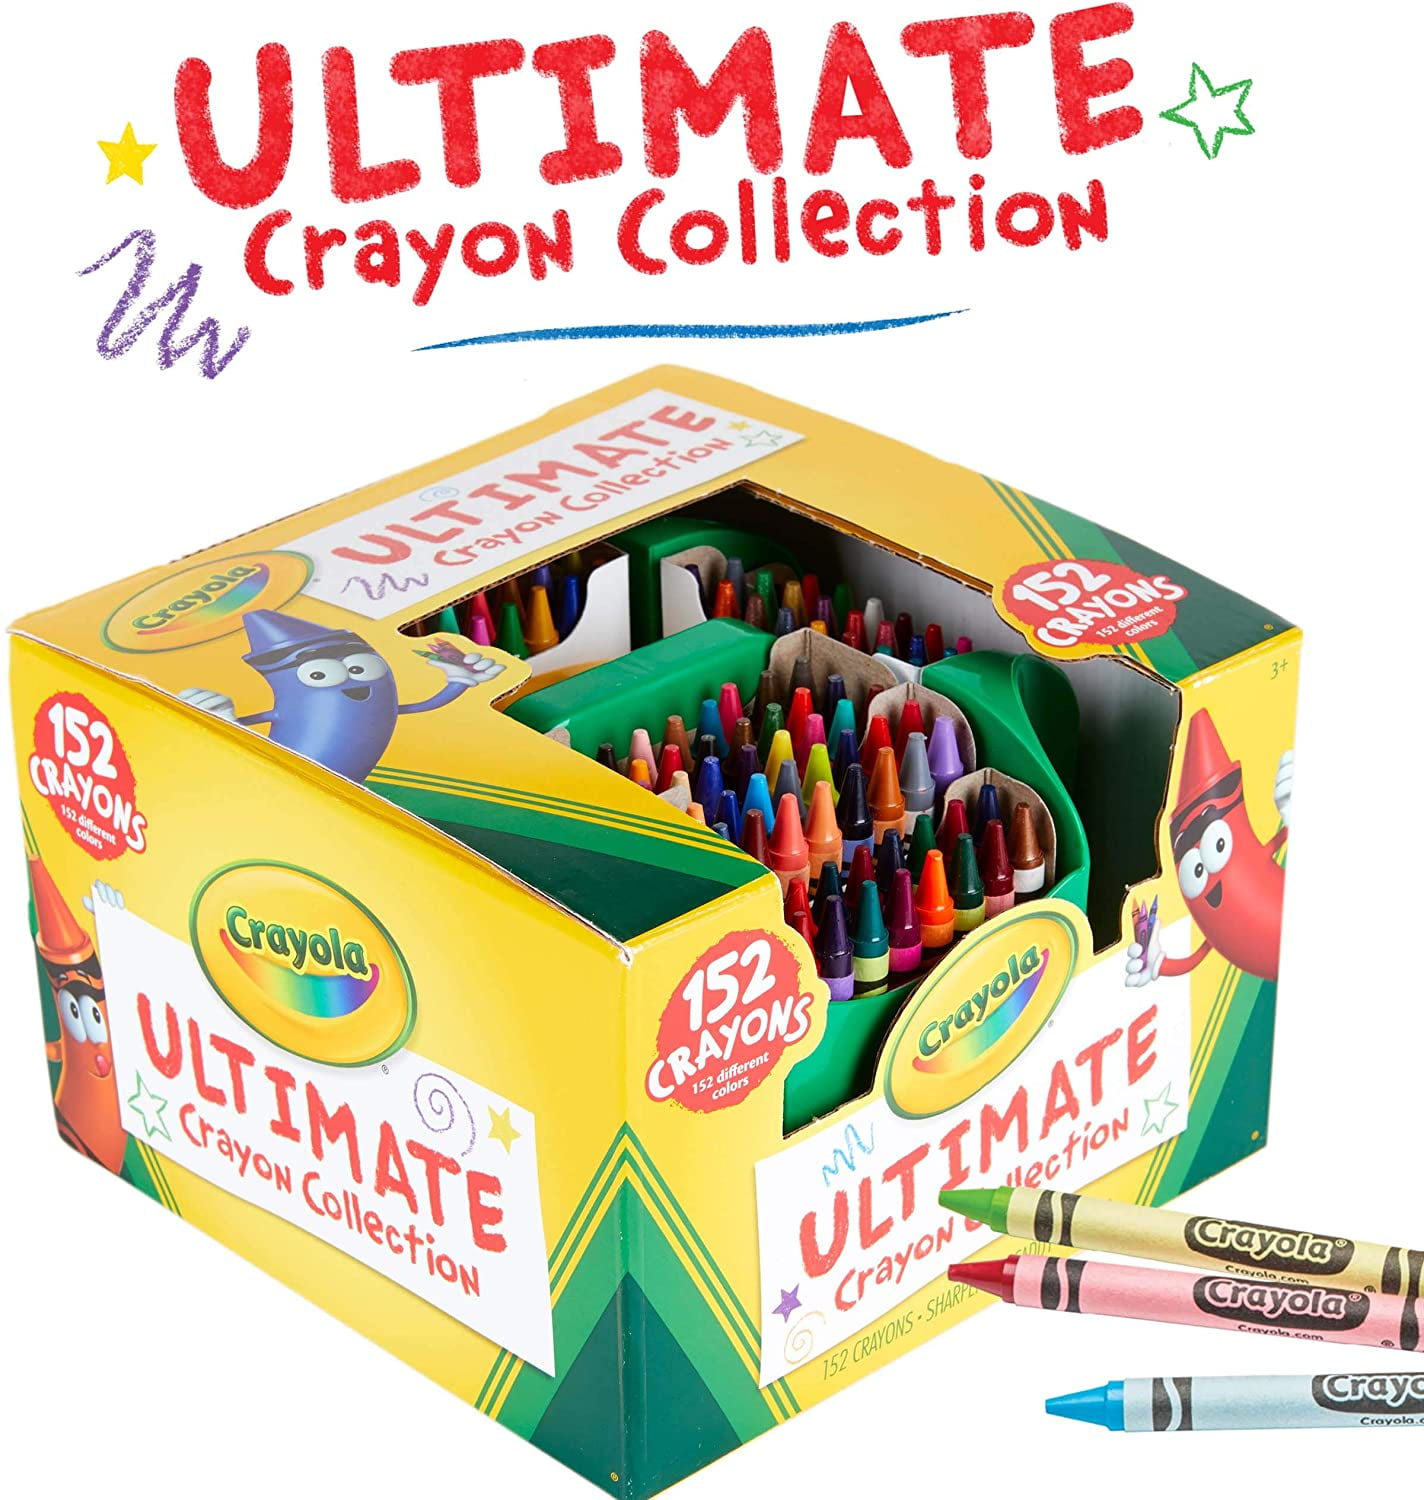 Crayola Ultimate Light Board, Drawing Tablet, Gift for Kids, Age 6